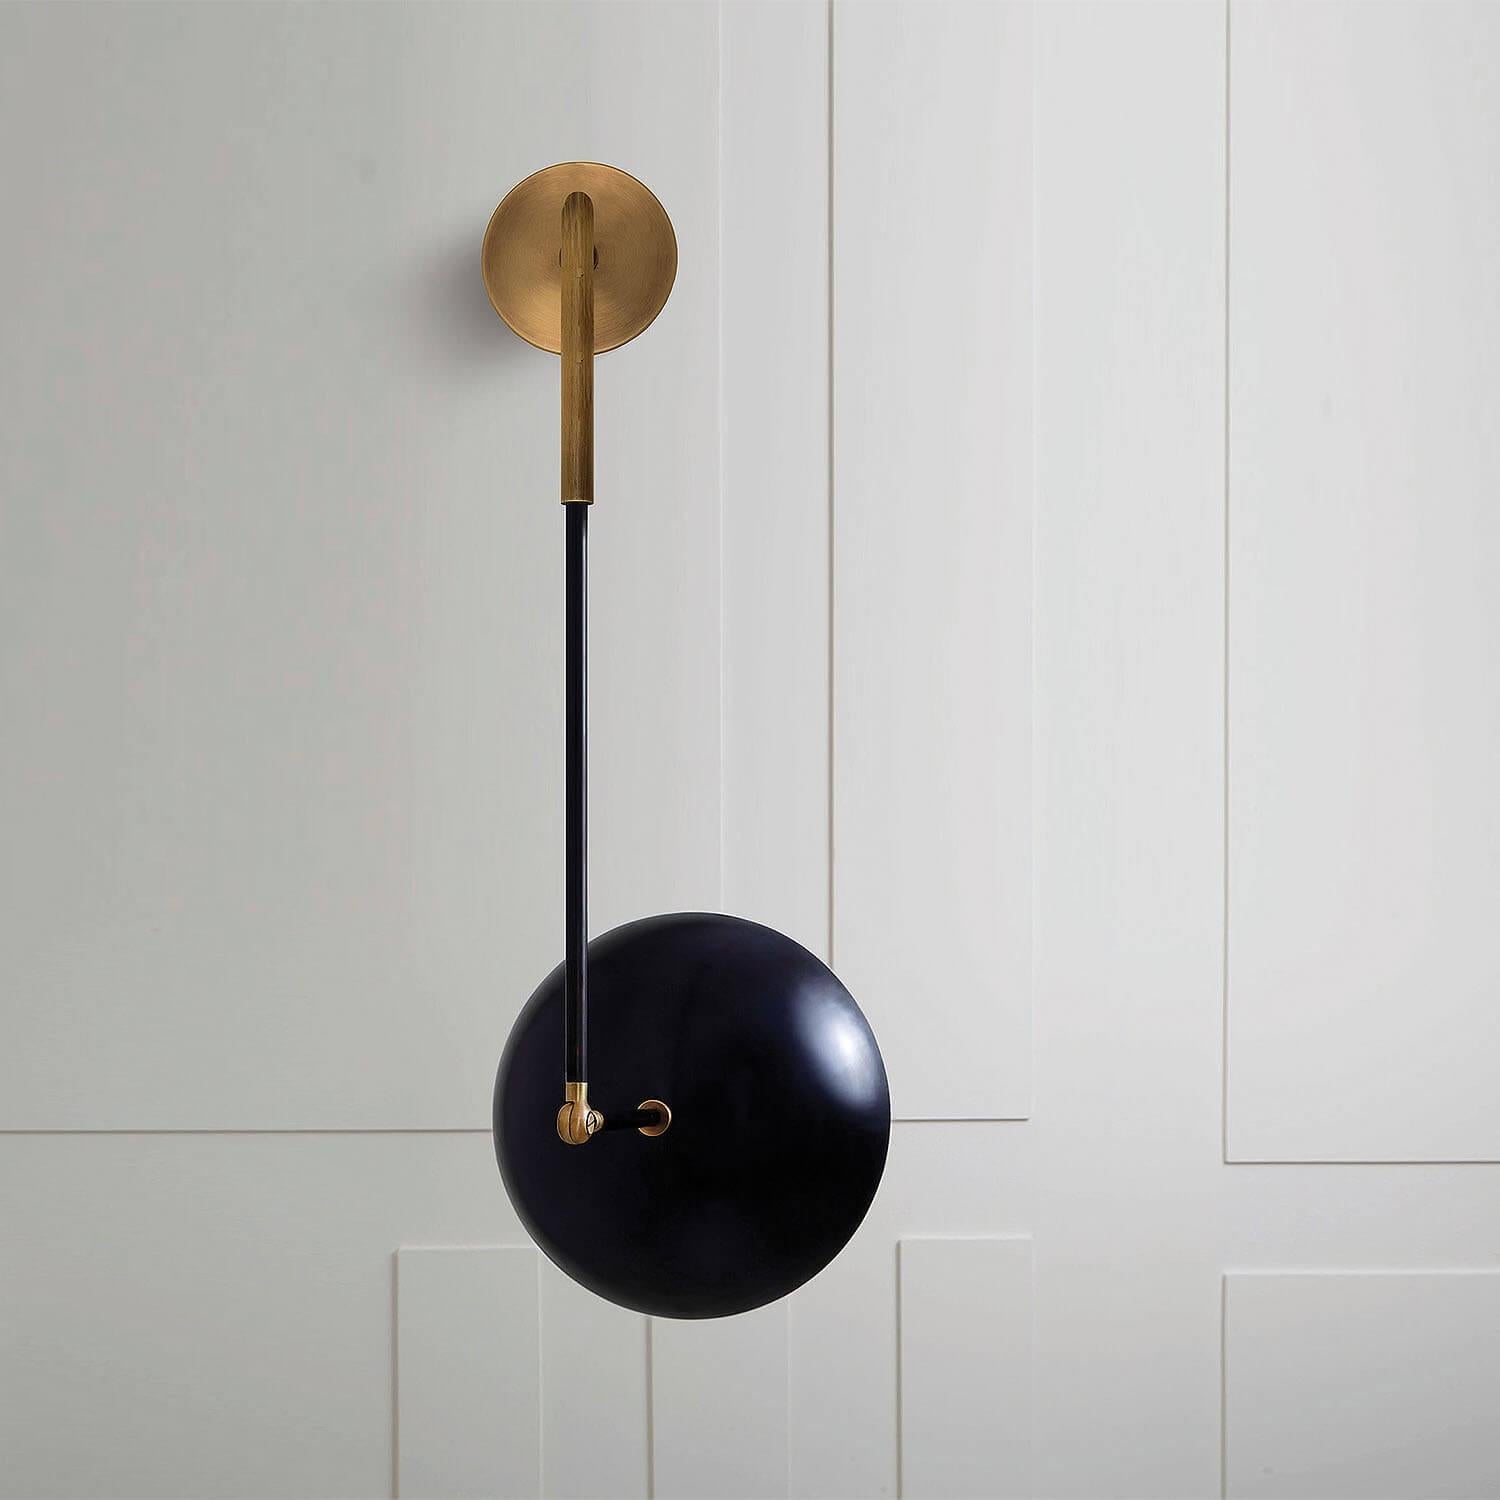 Tango sconce by Paul Matter
Dimensions: W 30 x D 30 x H 73 cm
Materials: Brass.
Available in different finishes.

Tango is born from playful experimentation with vintage lighting components.
Burnt, aged brass and etched glass are combined to